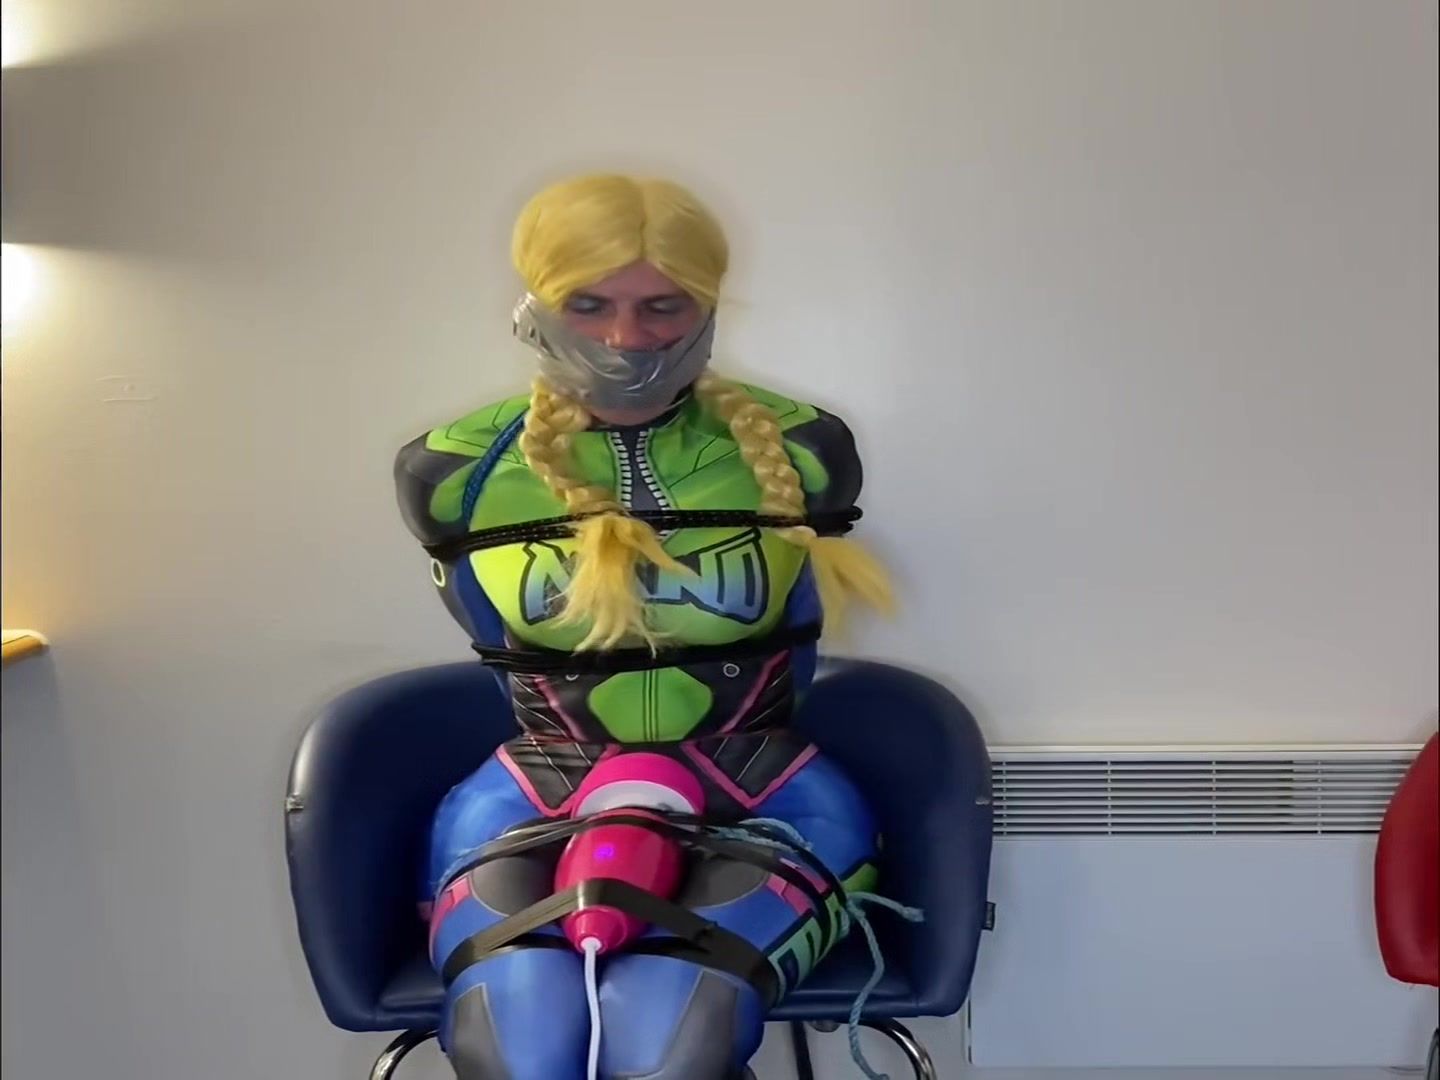 KeezMovies Cd Bound, Gagged And Cumming In Costume - D Va Fucked